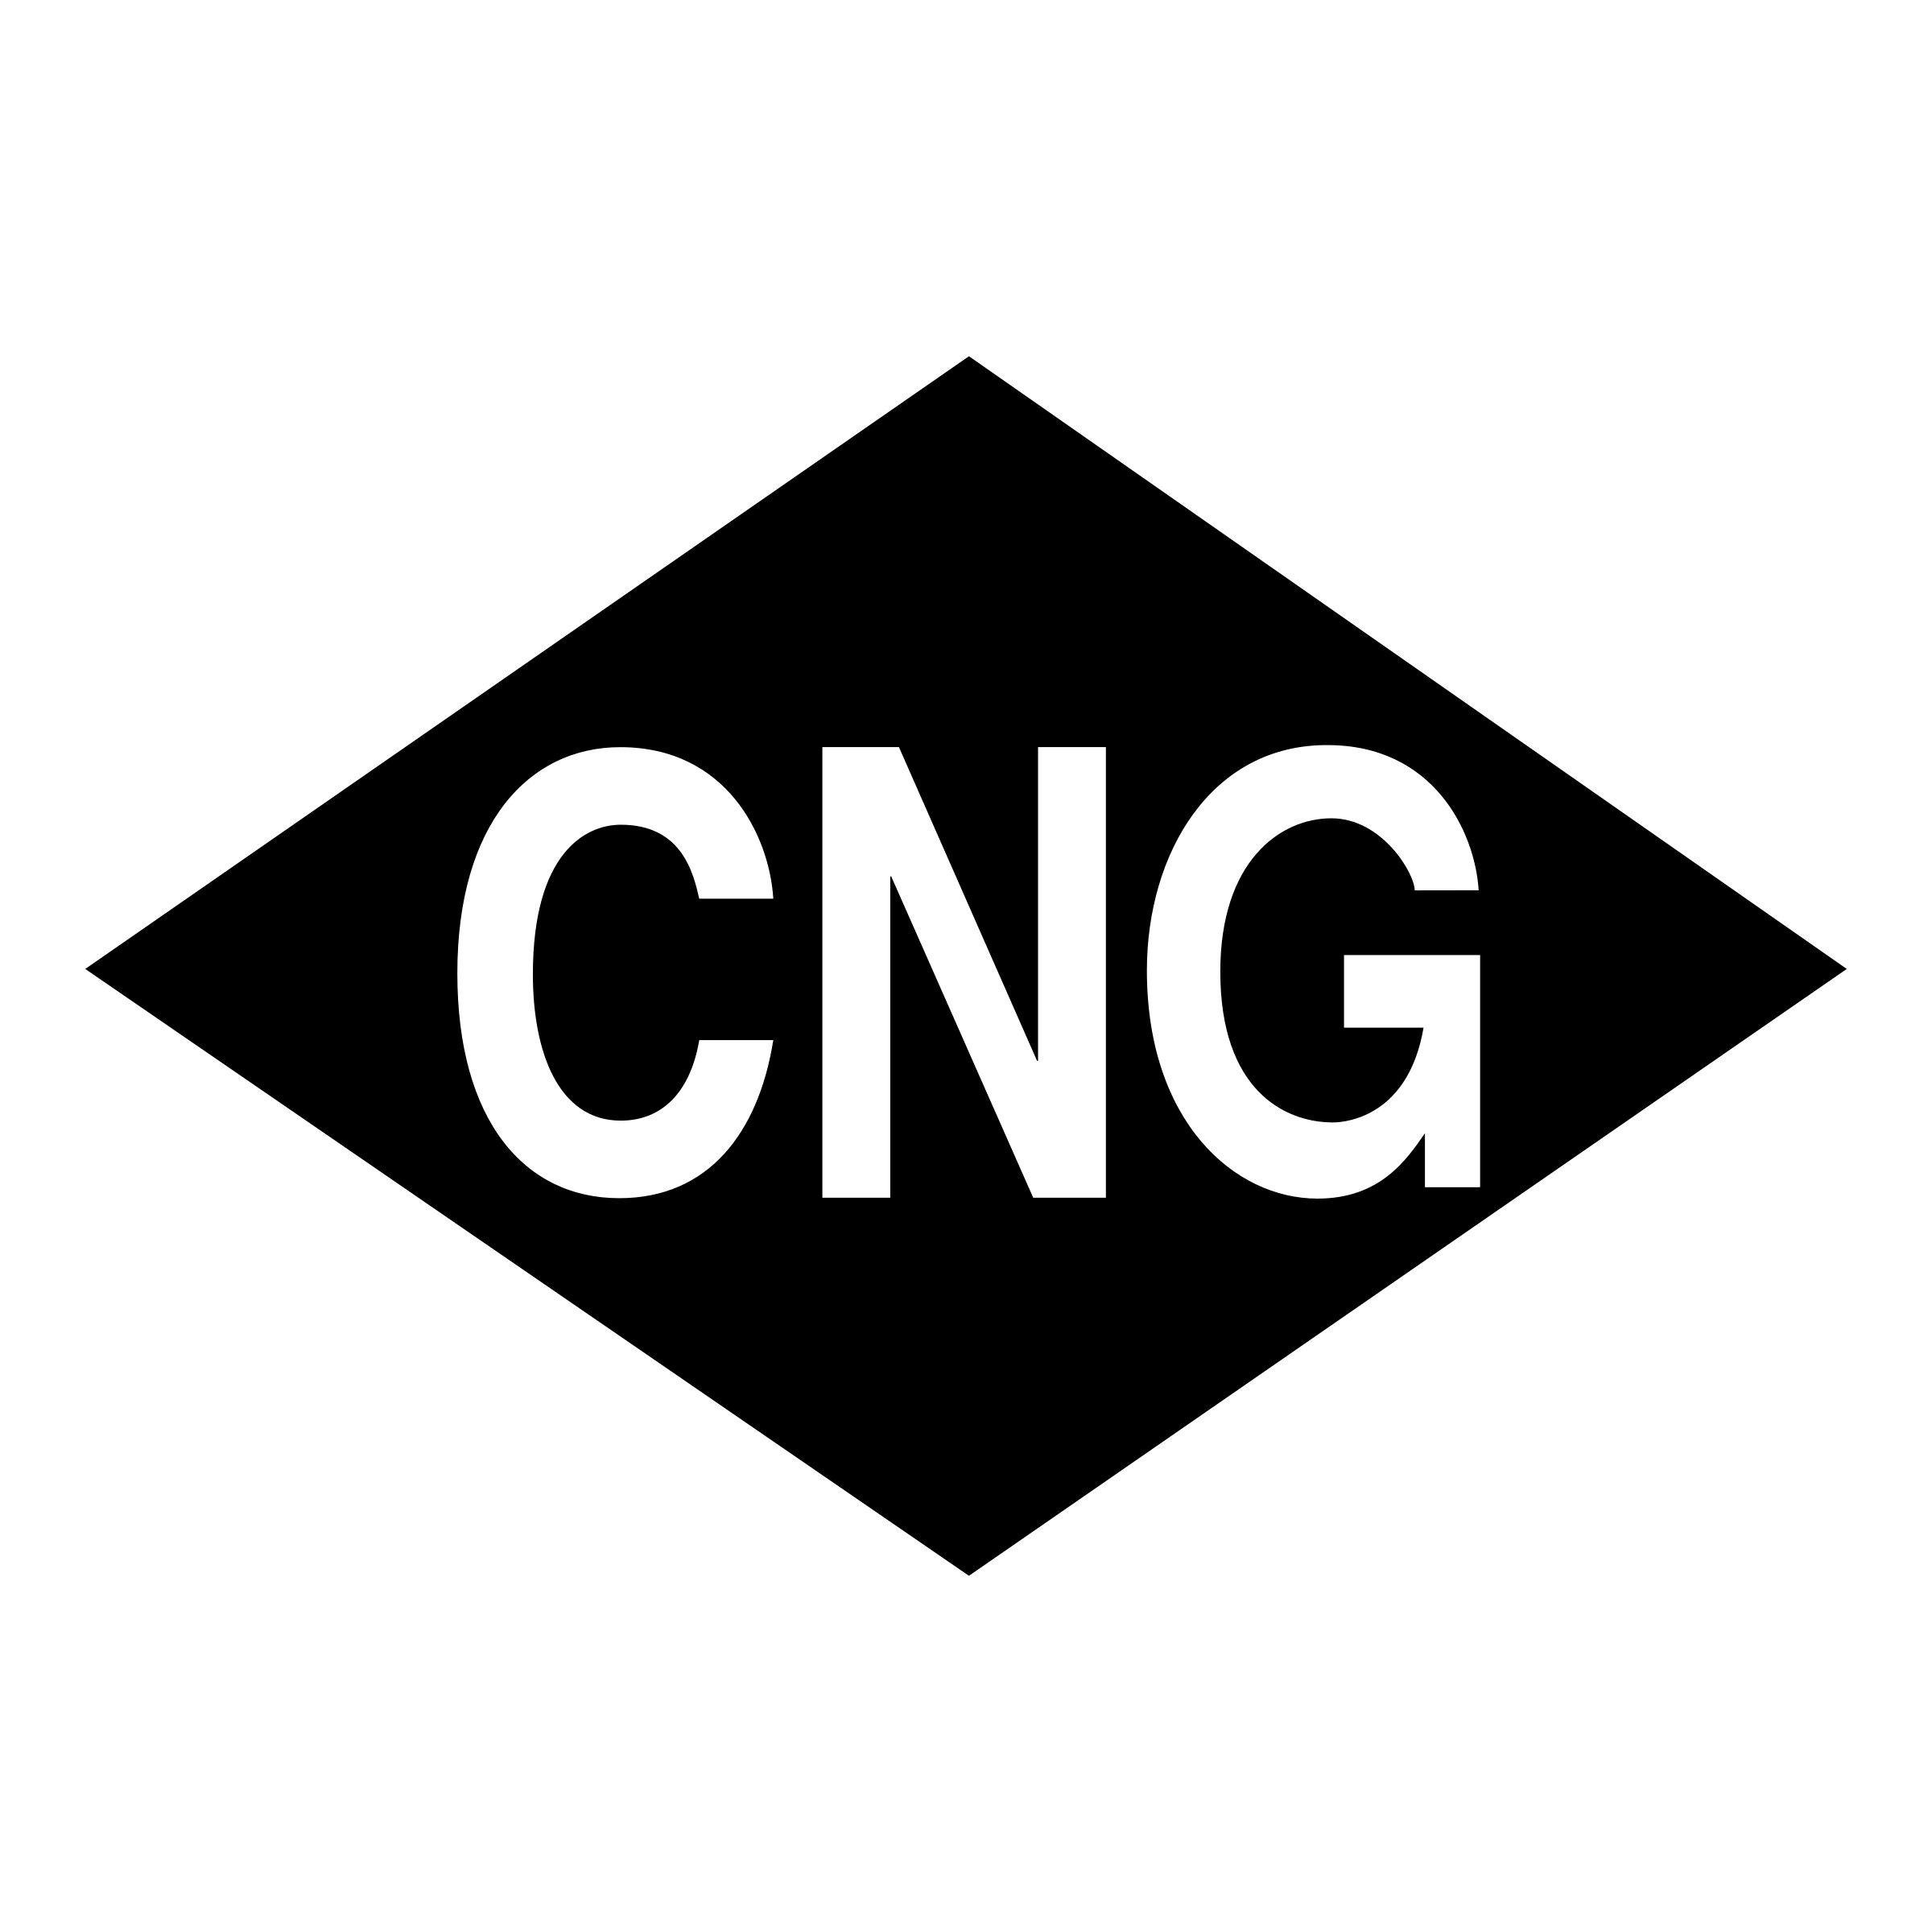 Monogram Outset Quality Cng High PNG